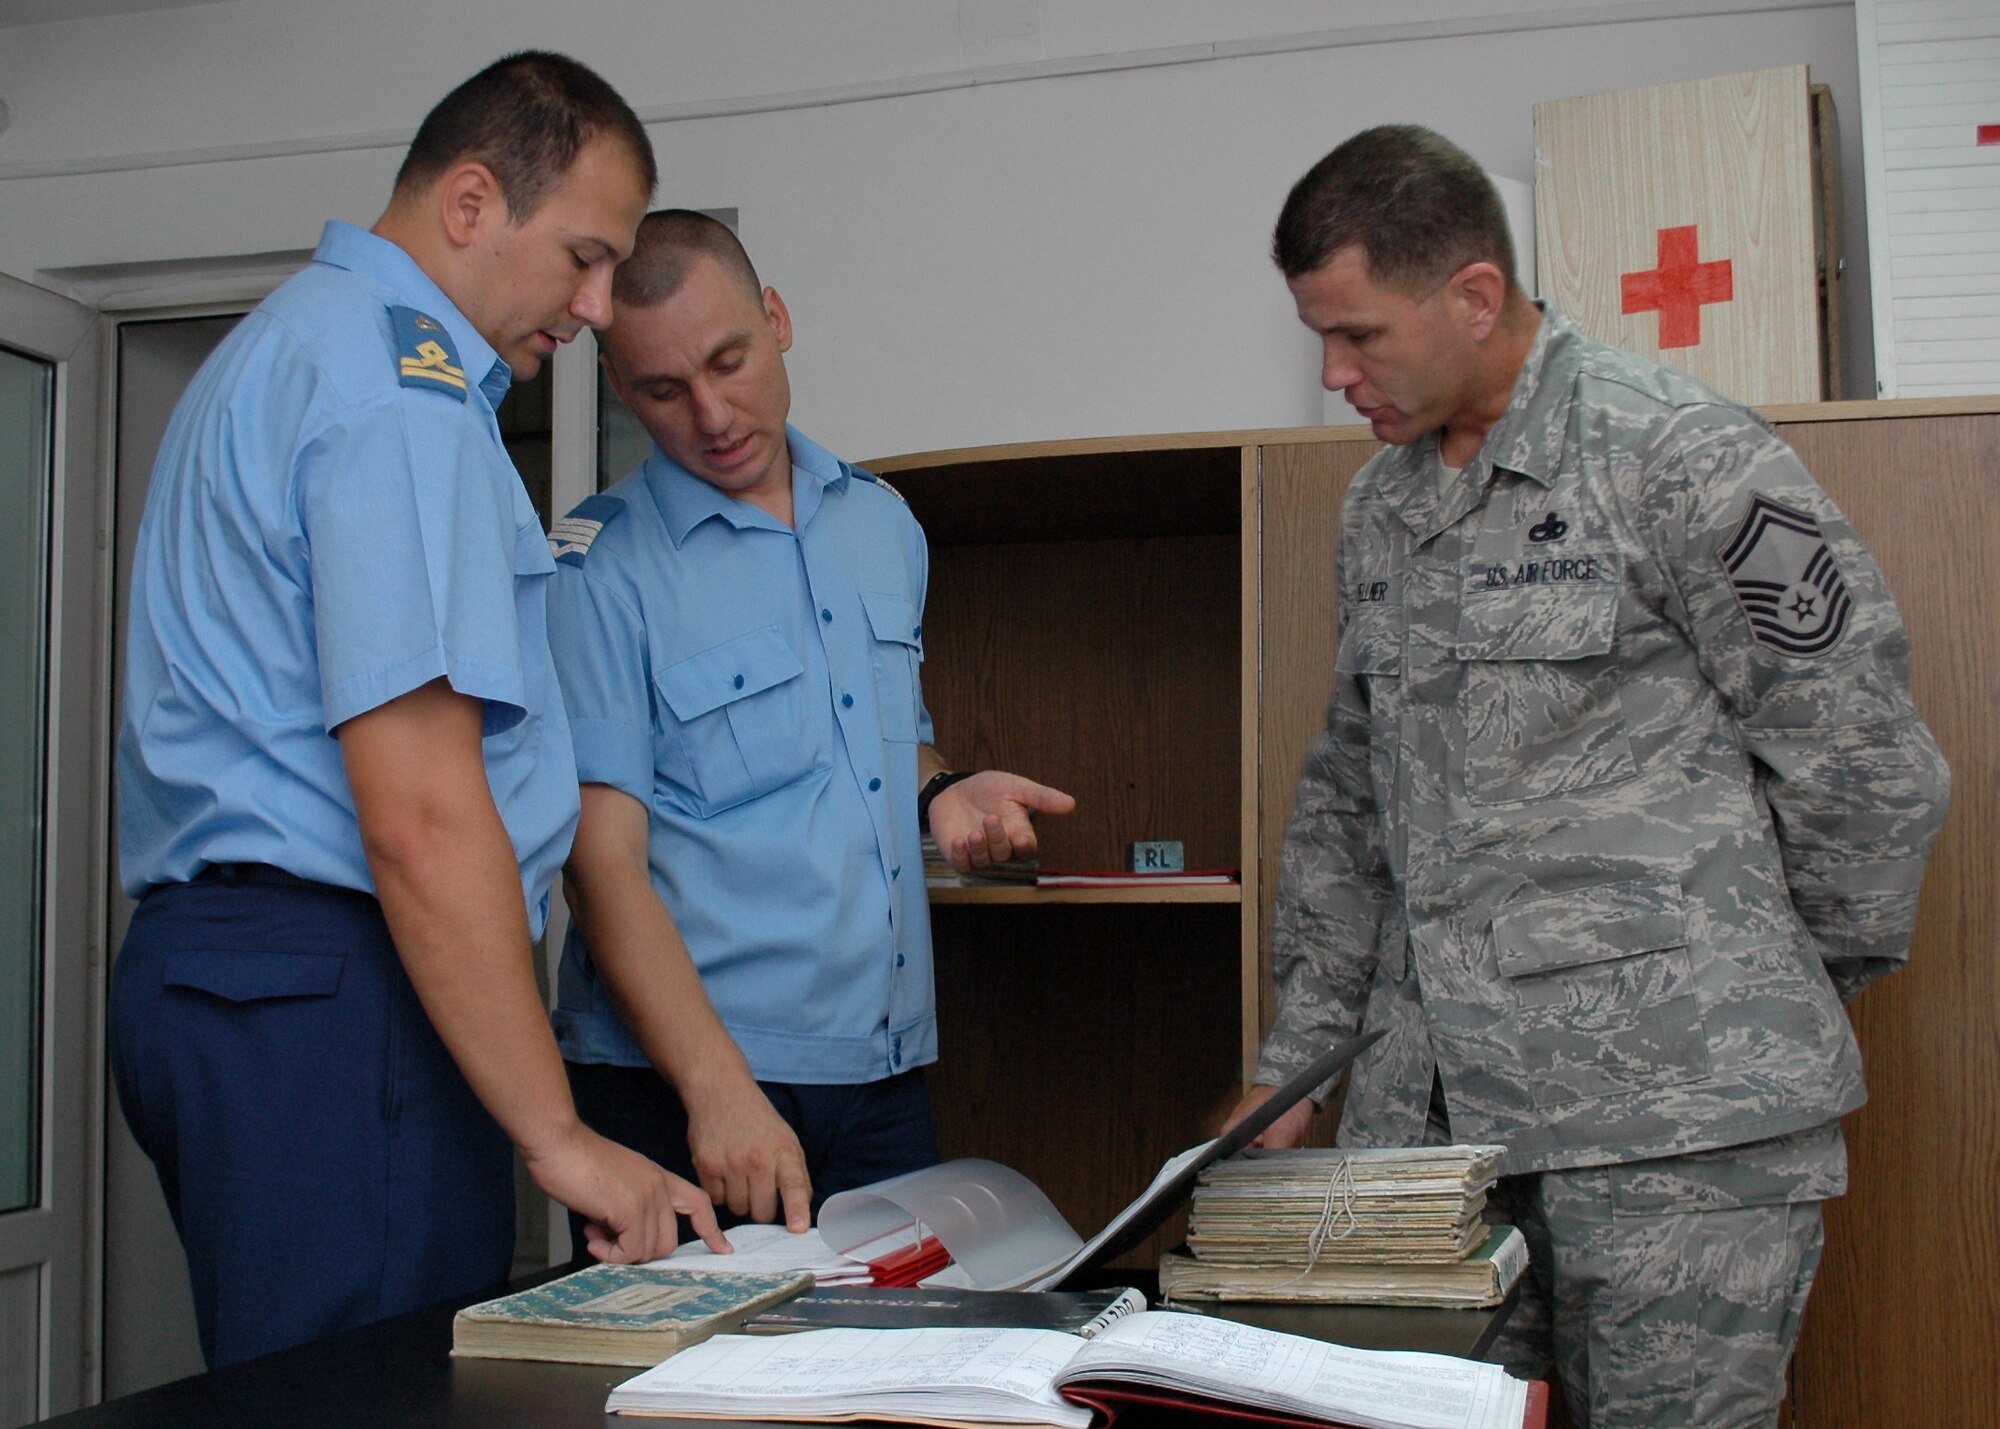 Romanian Air Force 1st Lt. Gabriel Tanase, (far left), and Warrant Officer Second Class Dima Valentin from the 86th Air Base in Fetesti, Romania, discuss how maintenance on the MiG-21 Lancer is documented in their log books Aug. 26, 2009, with Senior Master Sgt. Timothy Kellner, 31st Maintenance Group quality assurance superintendent.  Sergeant Kellner was part of a three-person U.S. Air Forces in Europe Maintenance NCO Training Program Traveling Contact Team who met with RoAF aircraft maintainers and WO and NCO school instructors Aug. 25-28.  (U.S. Air Force photo/Tech. Sgt. Michael O’Connor)